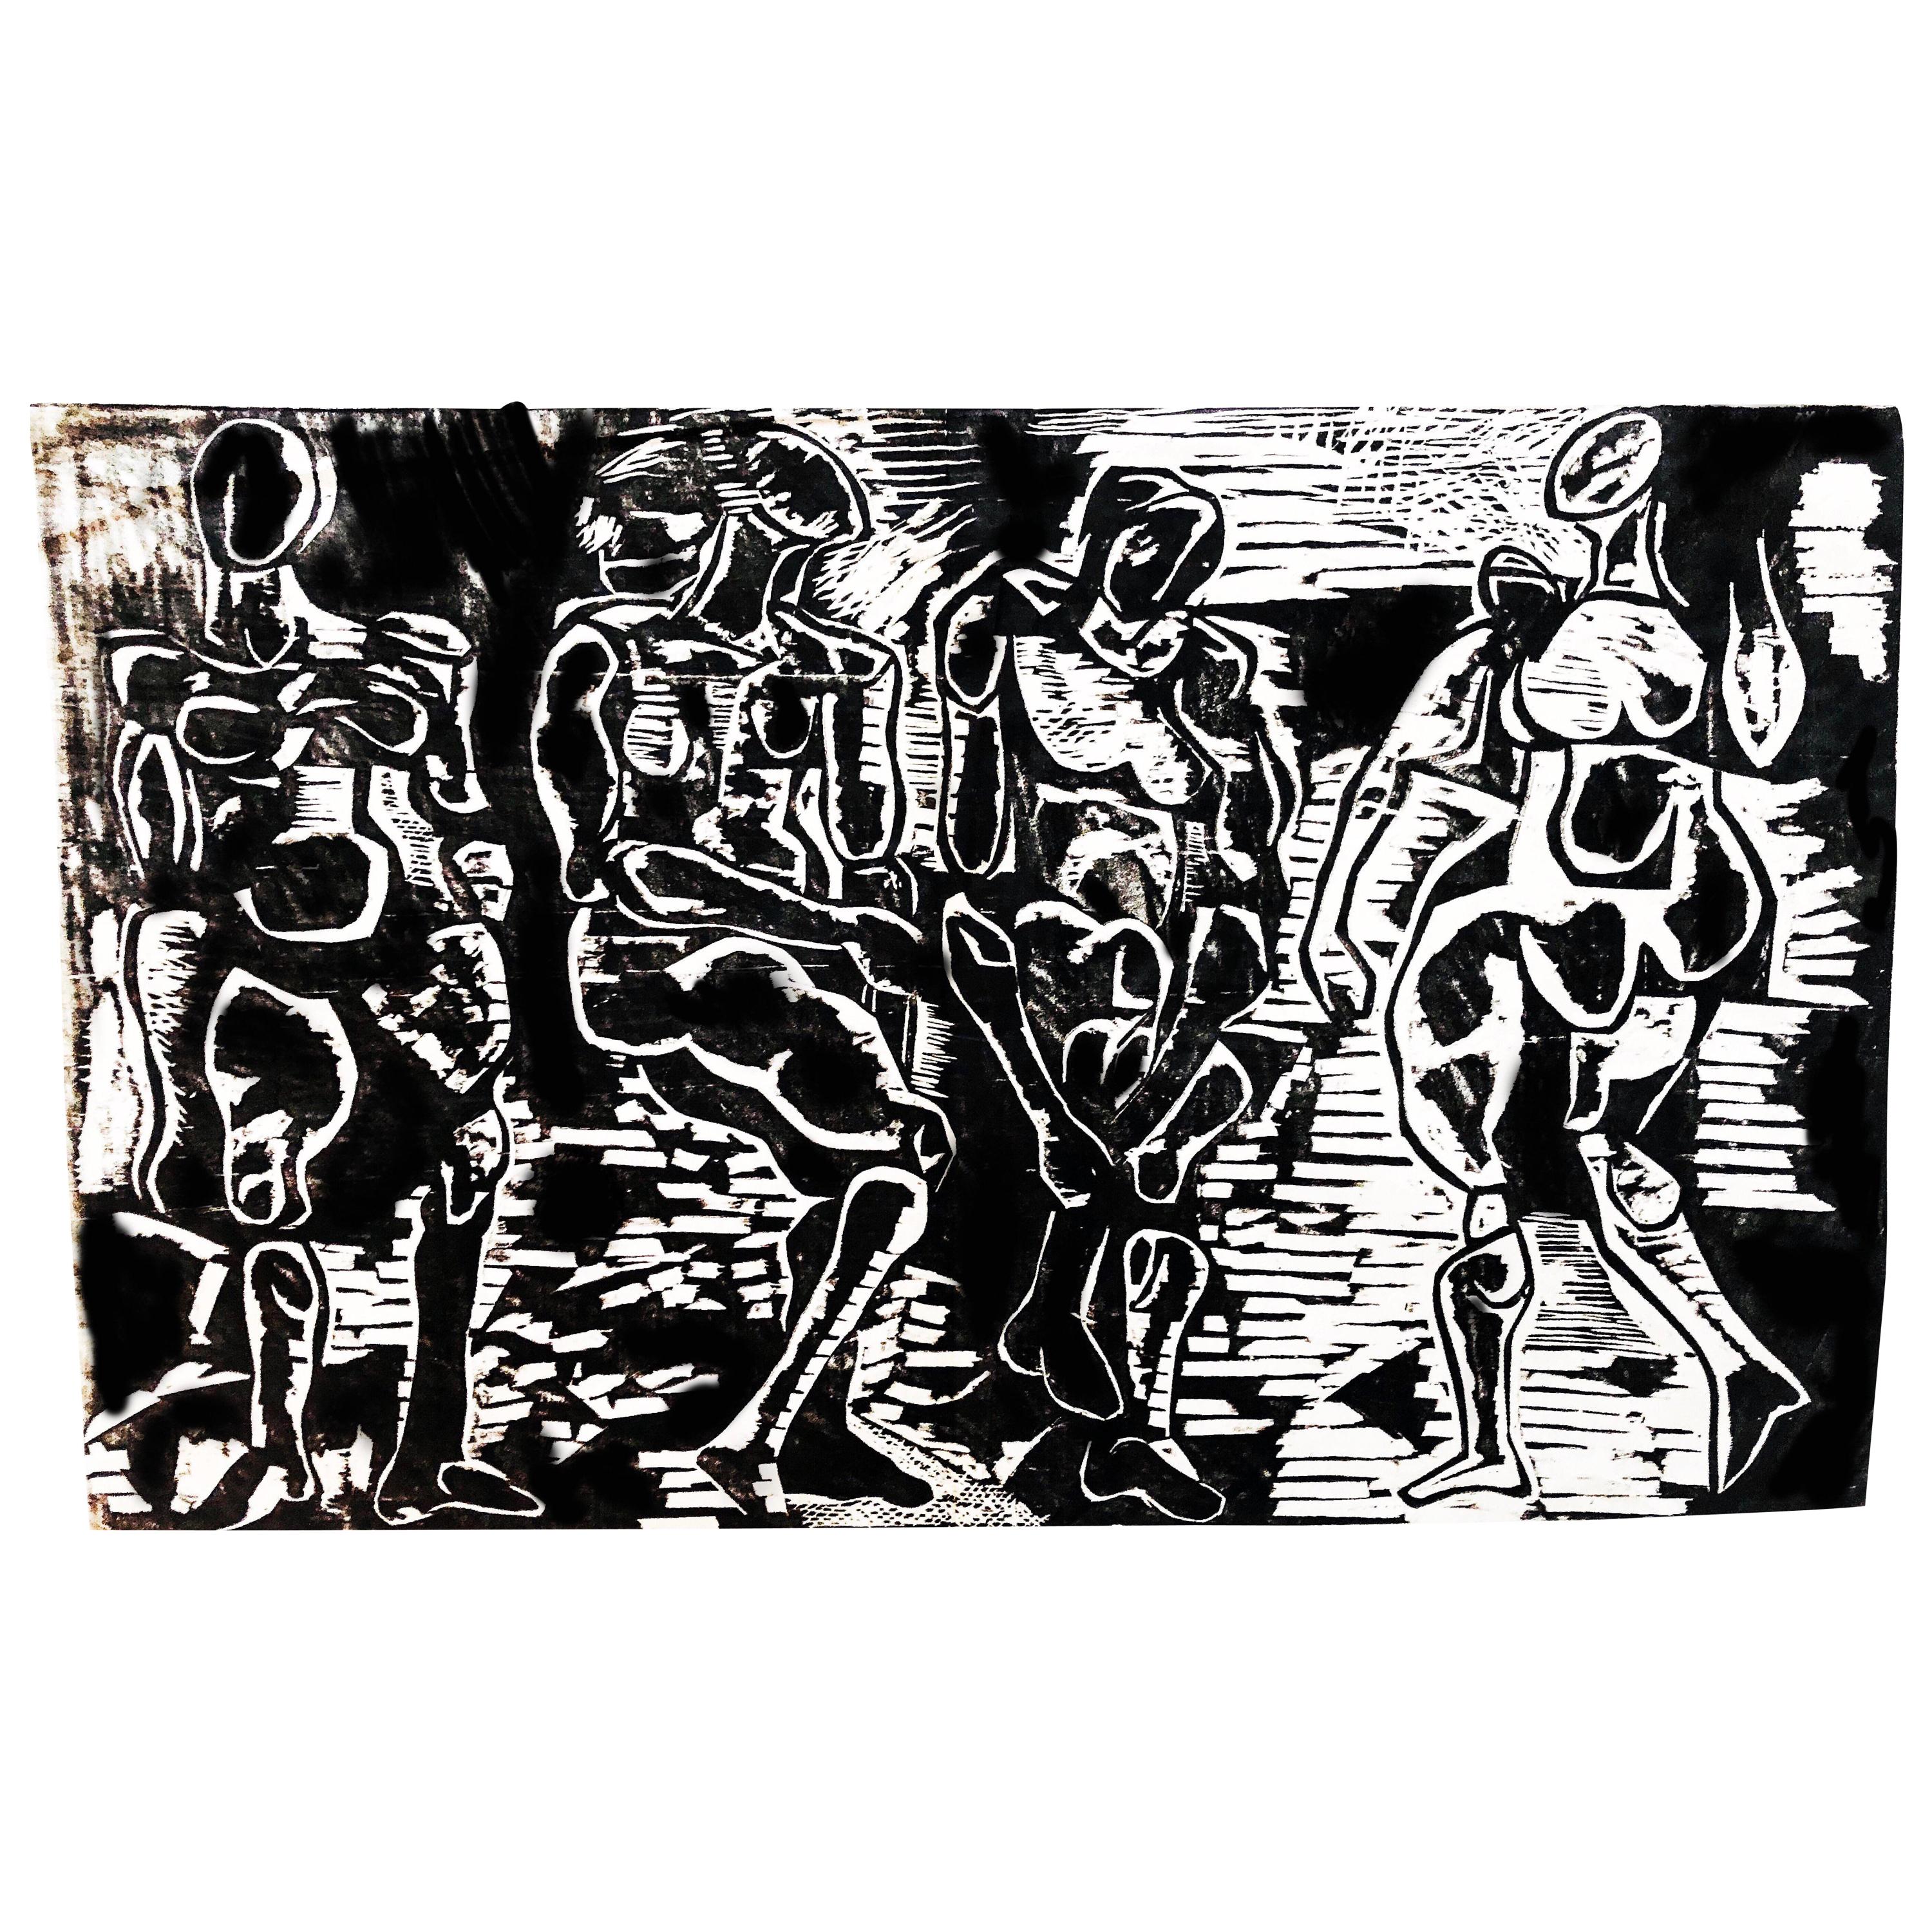 Abstract Woodblock Print Figural Black & White, Nudes, Salvatore Grippi,  1950s For Sale